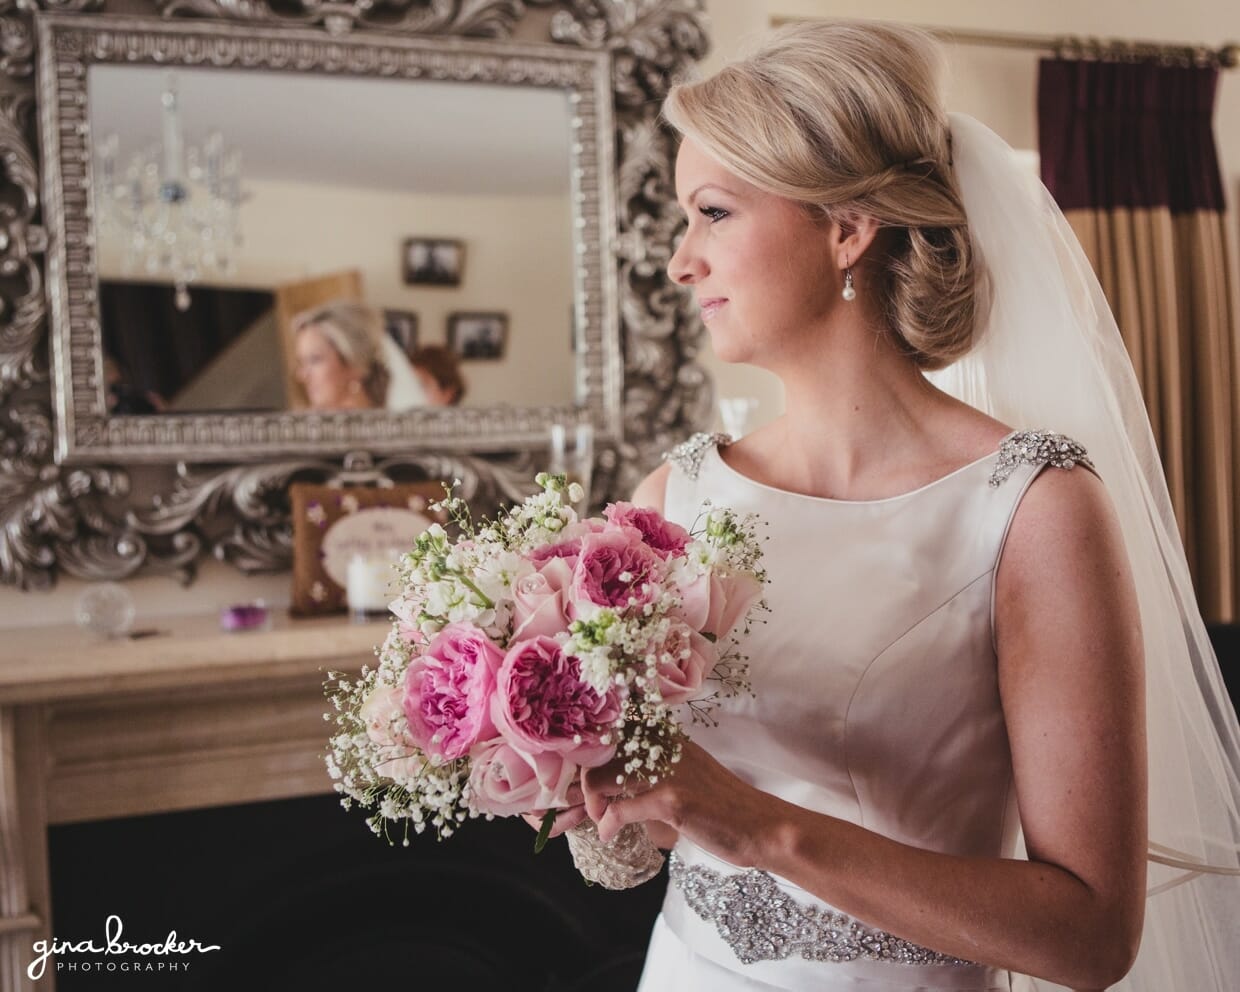 A natural and candid portrait of a bride holding a rose bouquet on the morning of her classic wedding